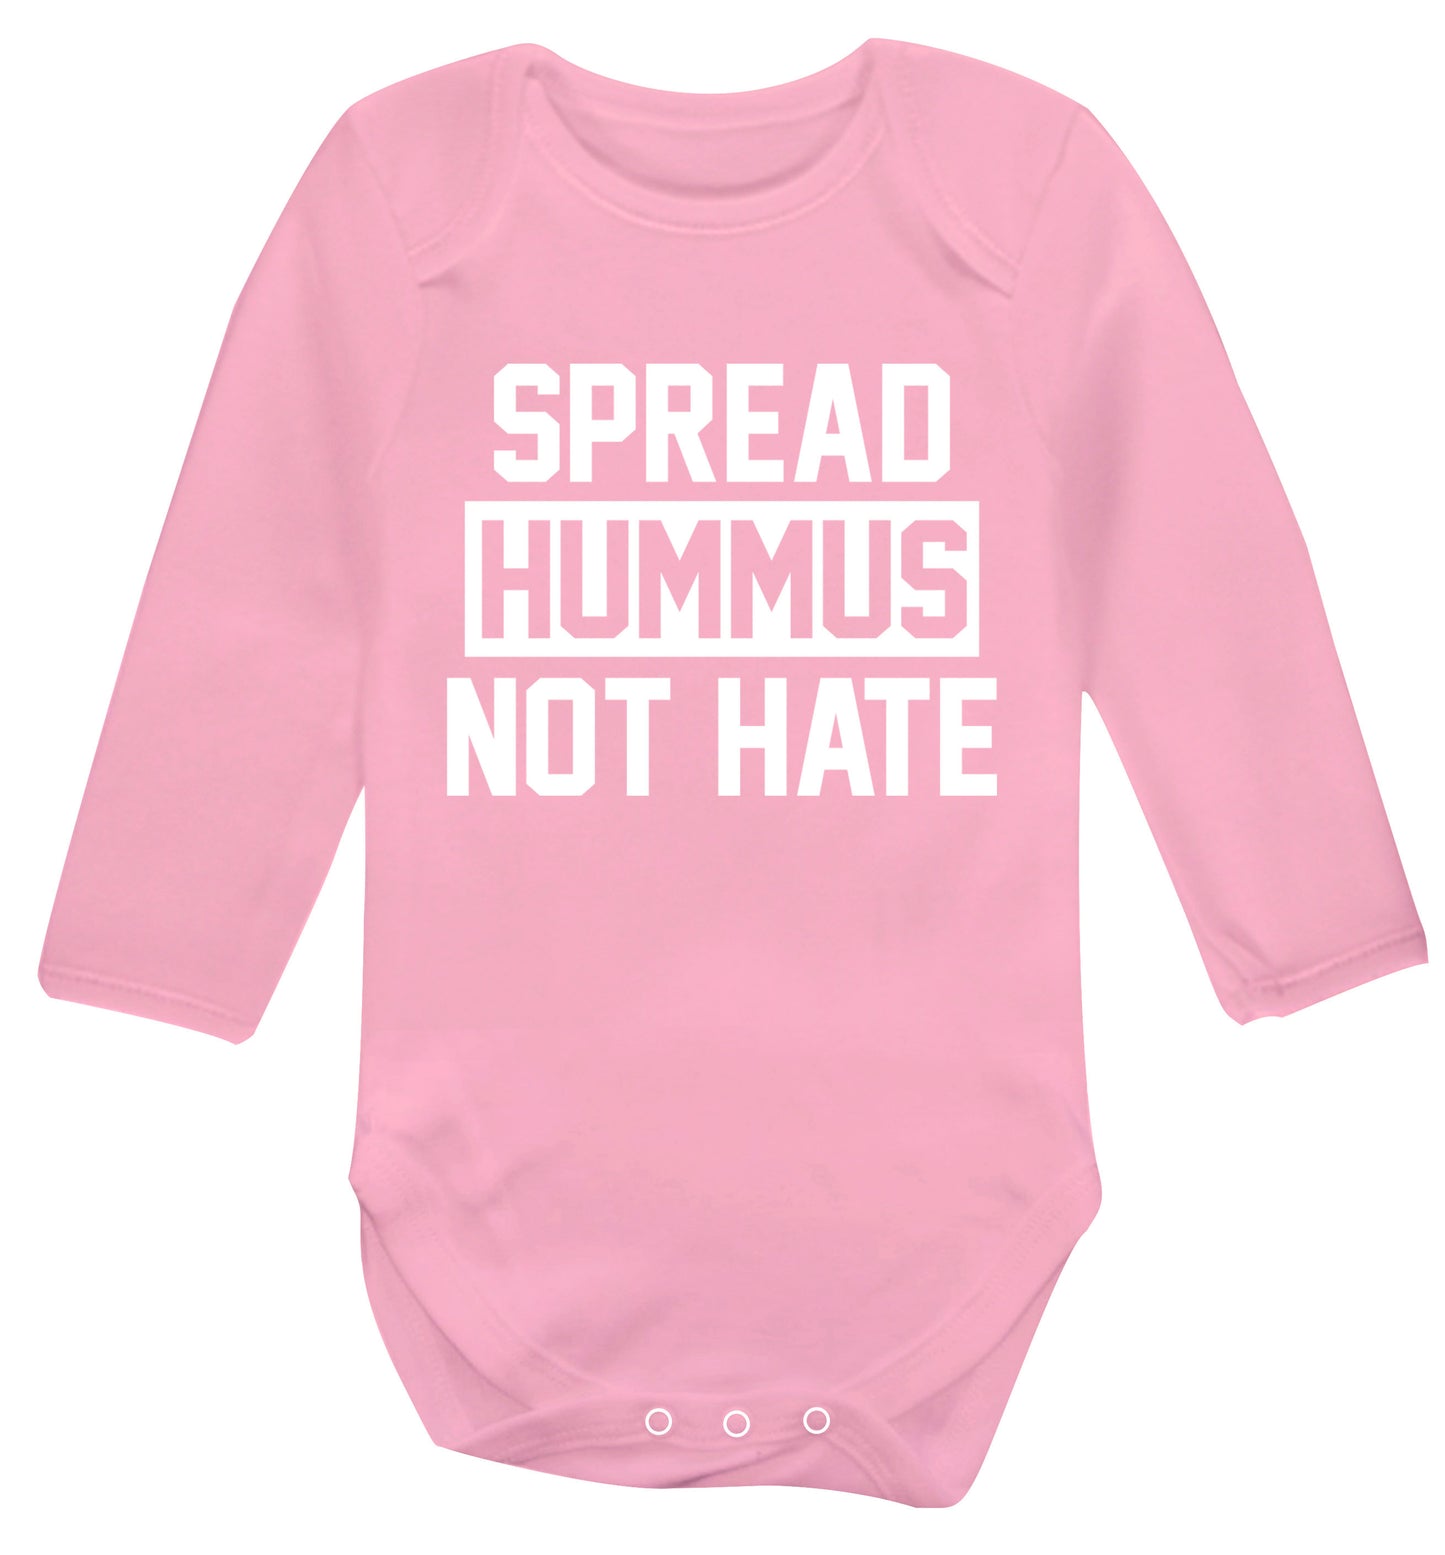 Spread hummus not hate Baby Vest long sleeved pale pink 6-12 months